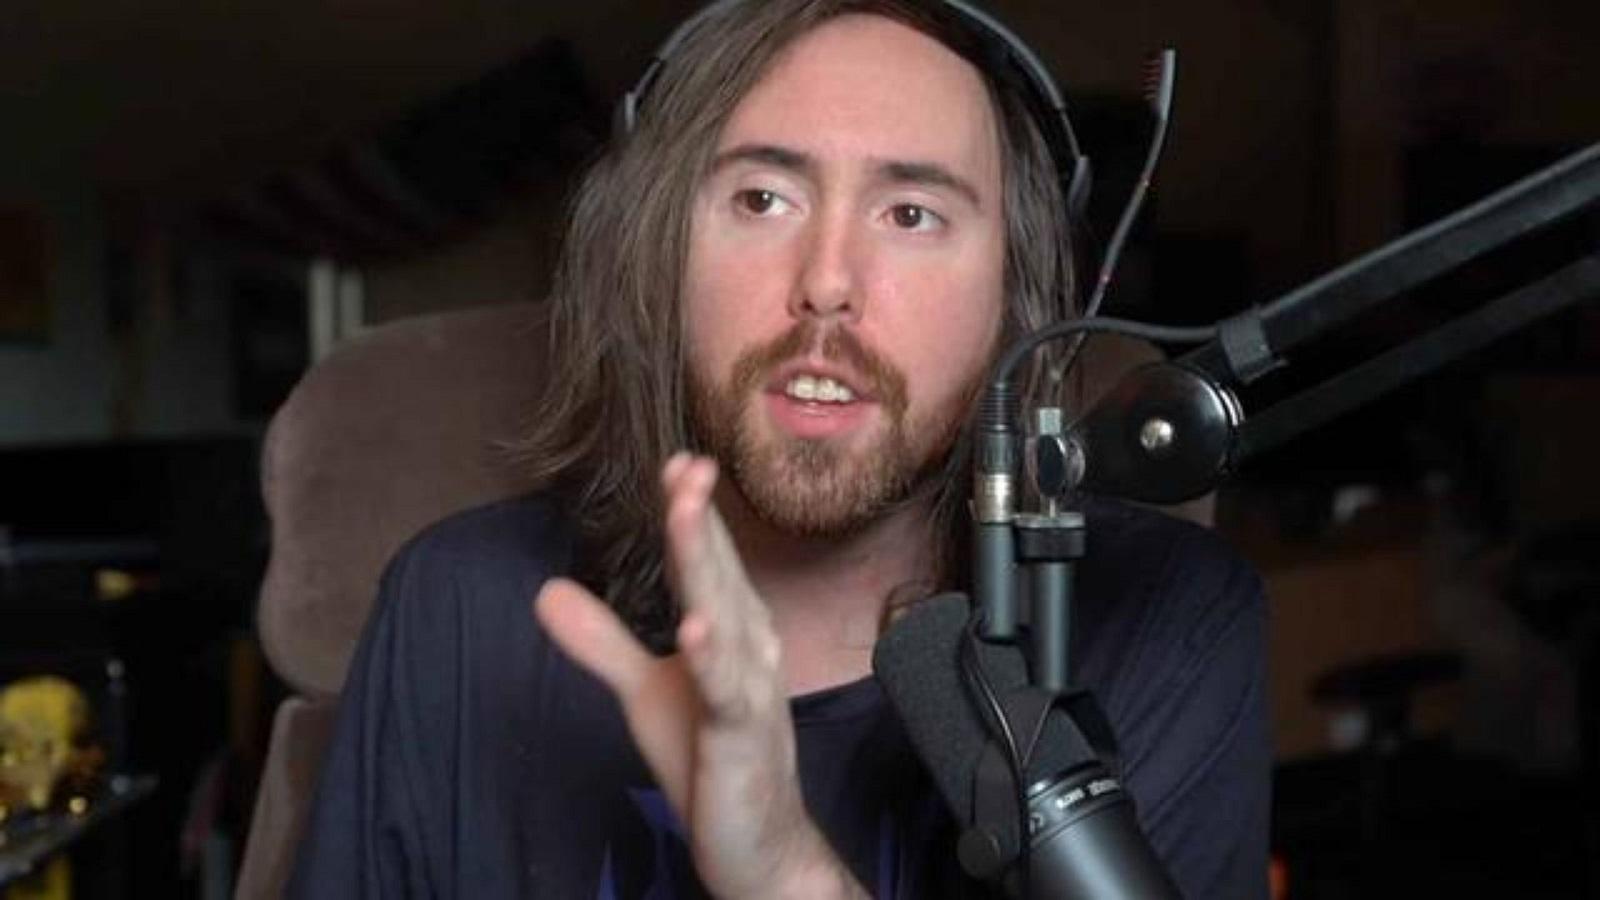 Asmongold main Twitch channel